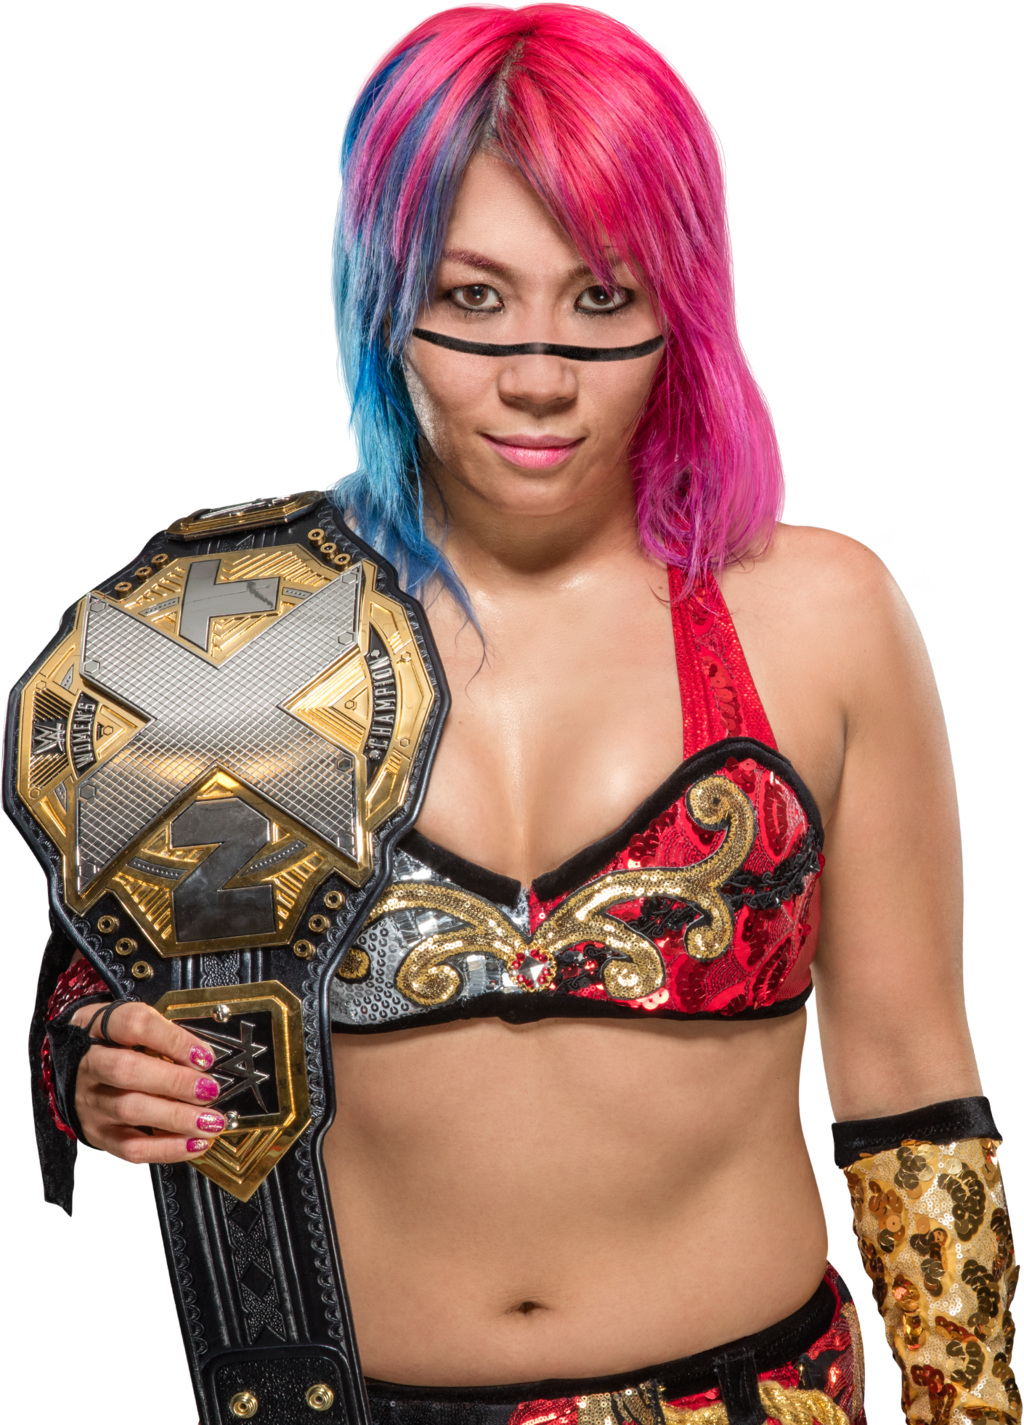 Asuka sets undefeated record